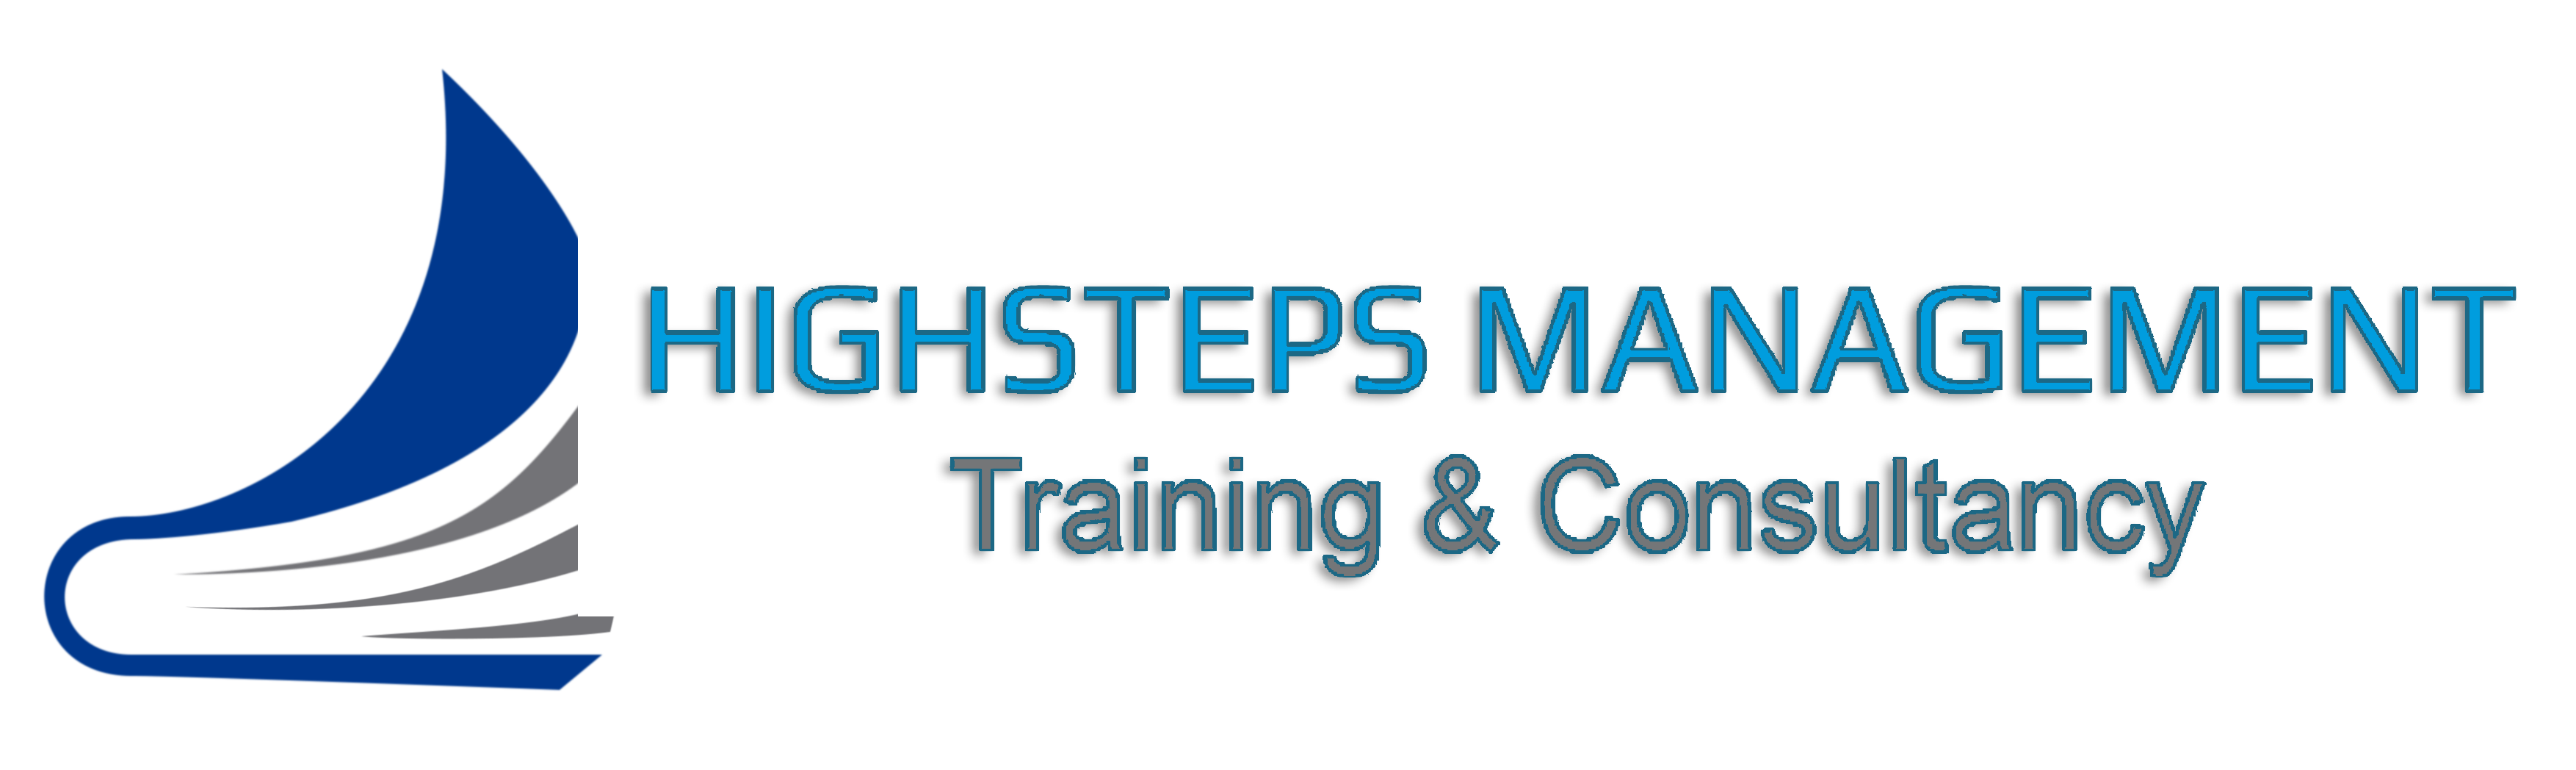 High Steps Training Consultancy